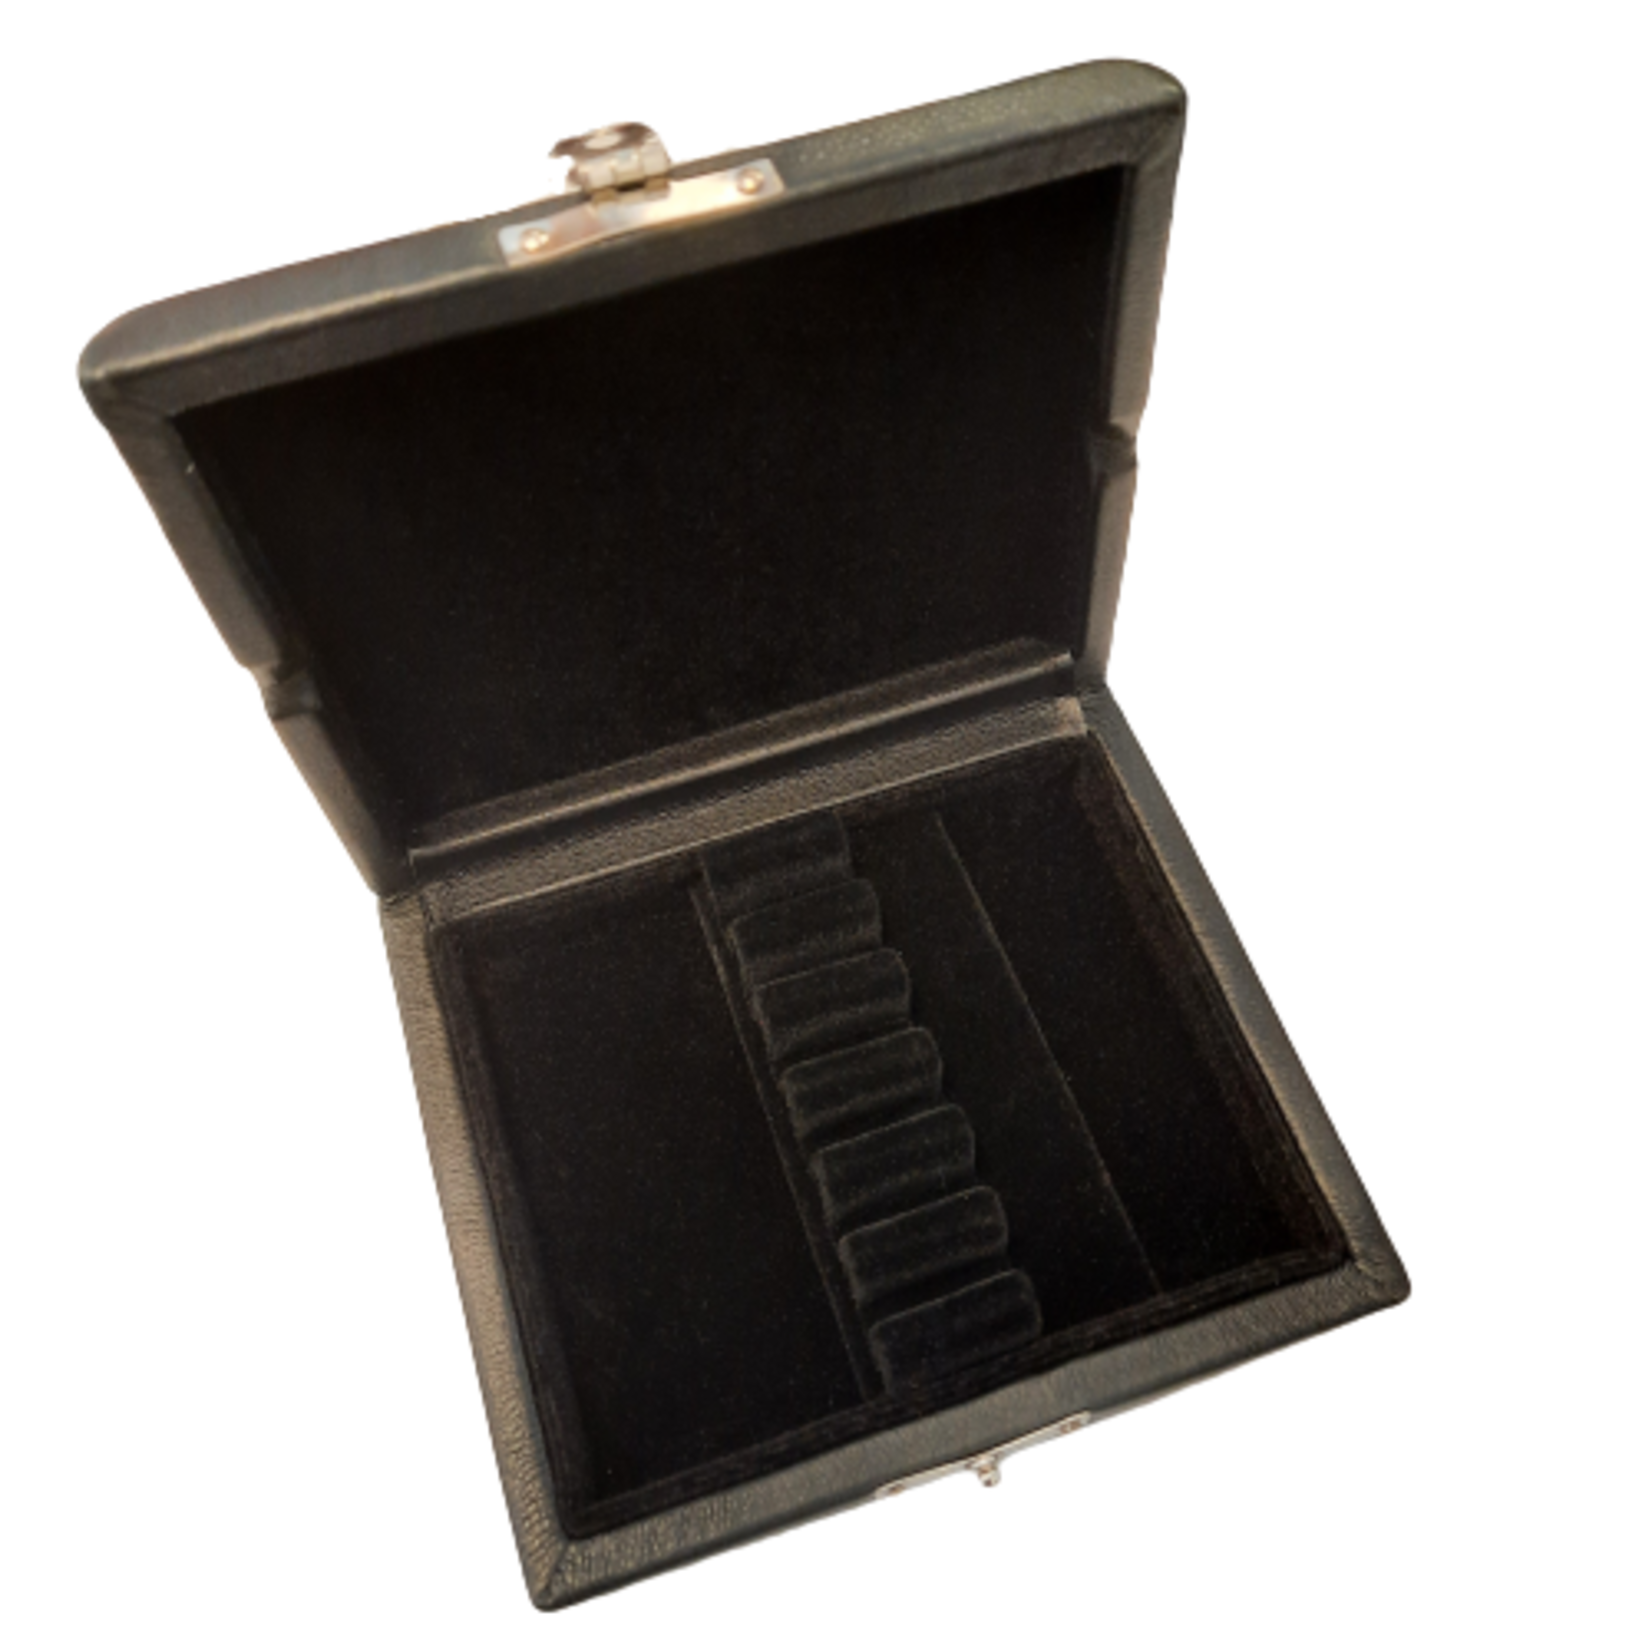 Leatherette oboe reed case, holds 6